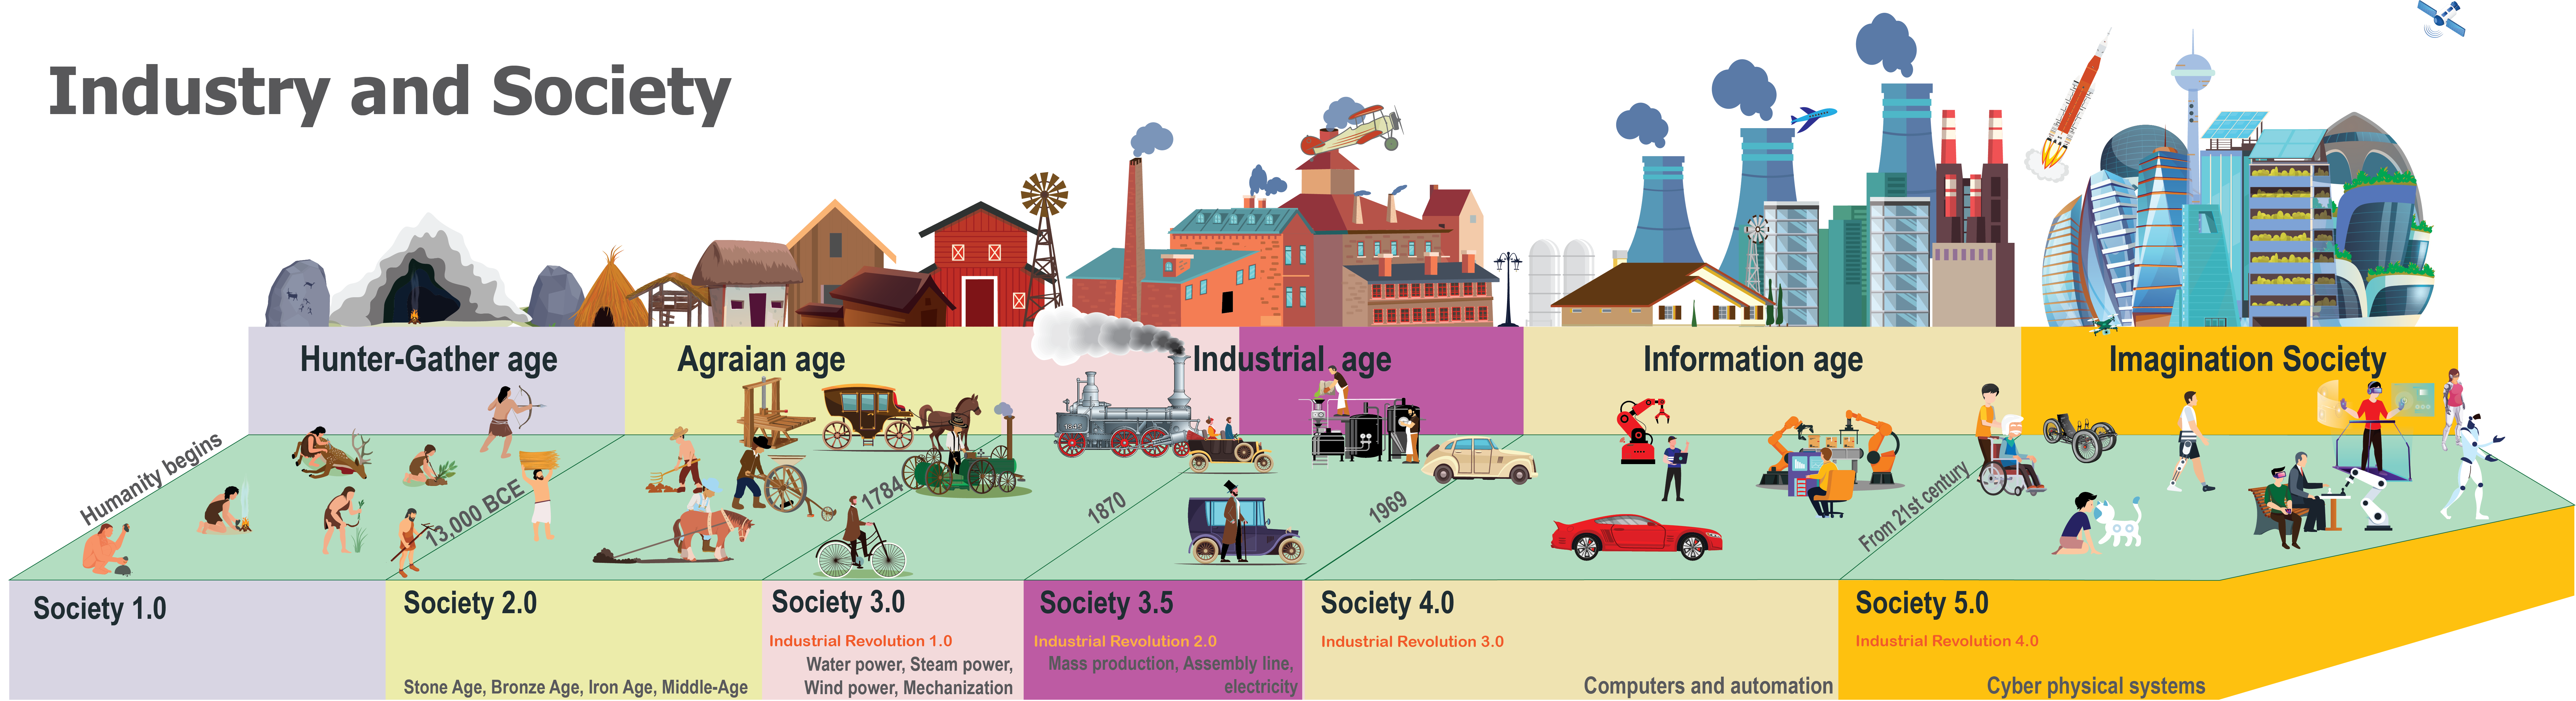 Society 5.0 and Industry 4.0 evolution